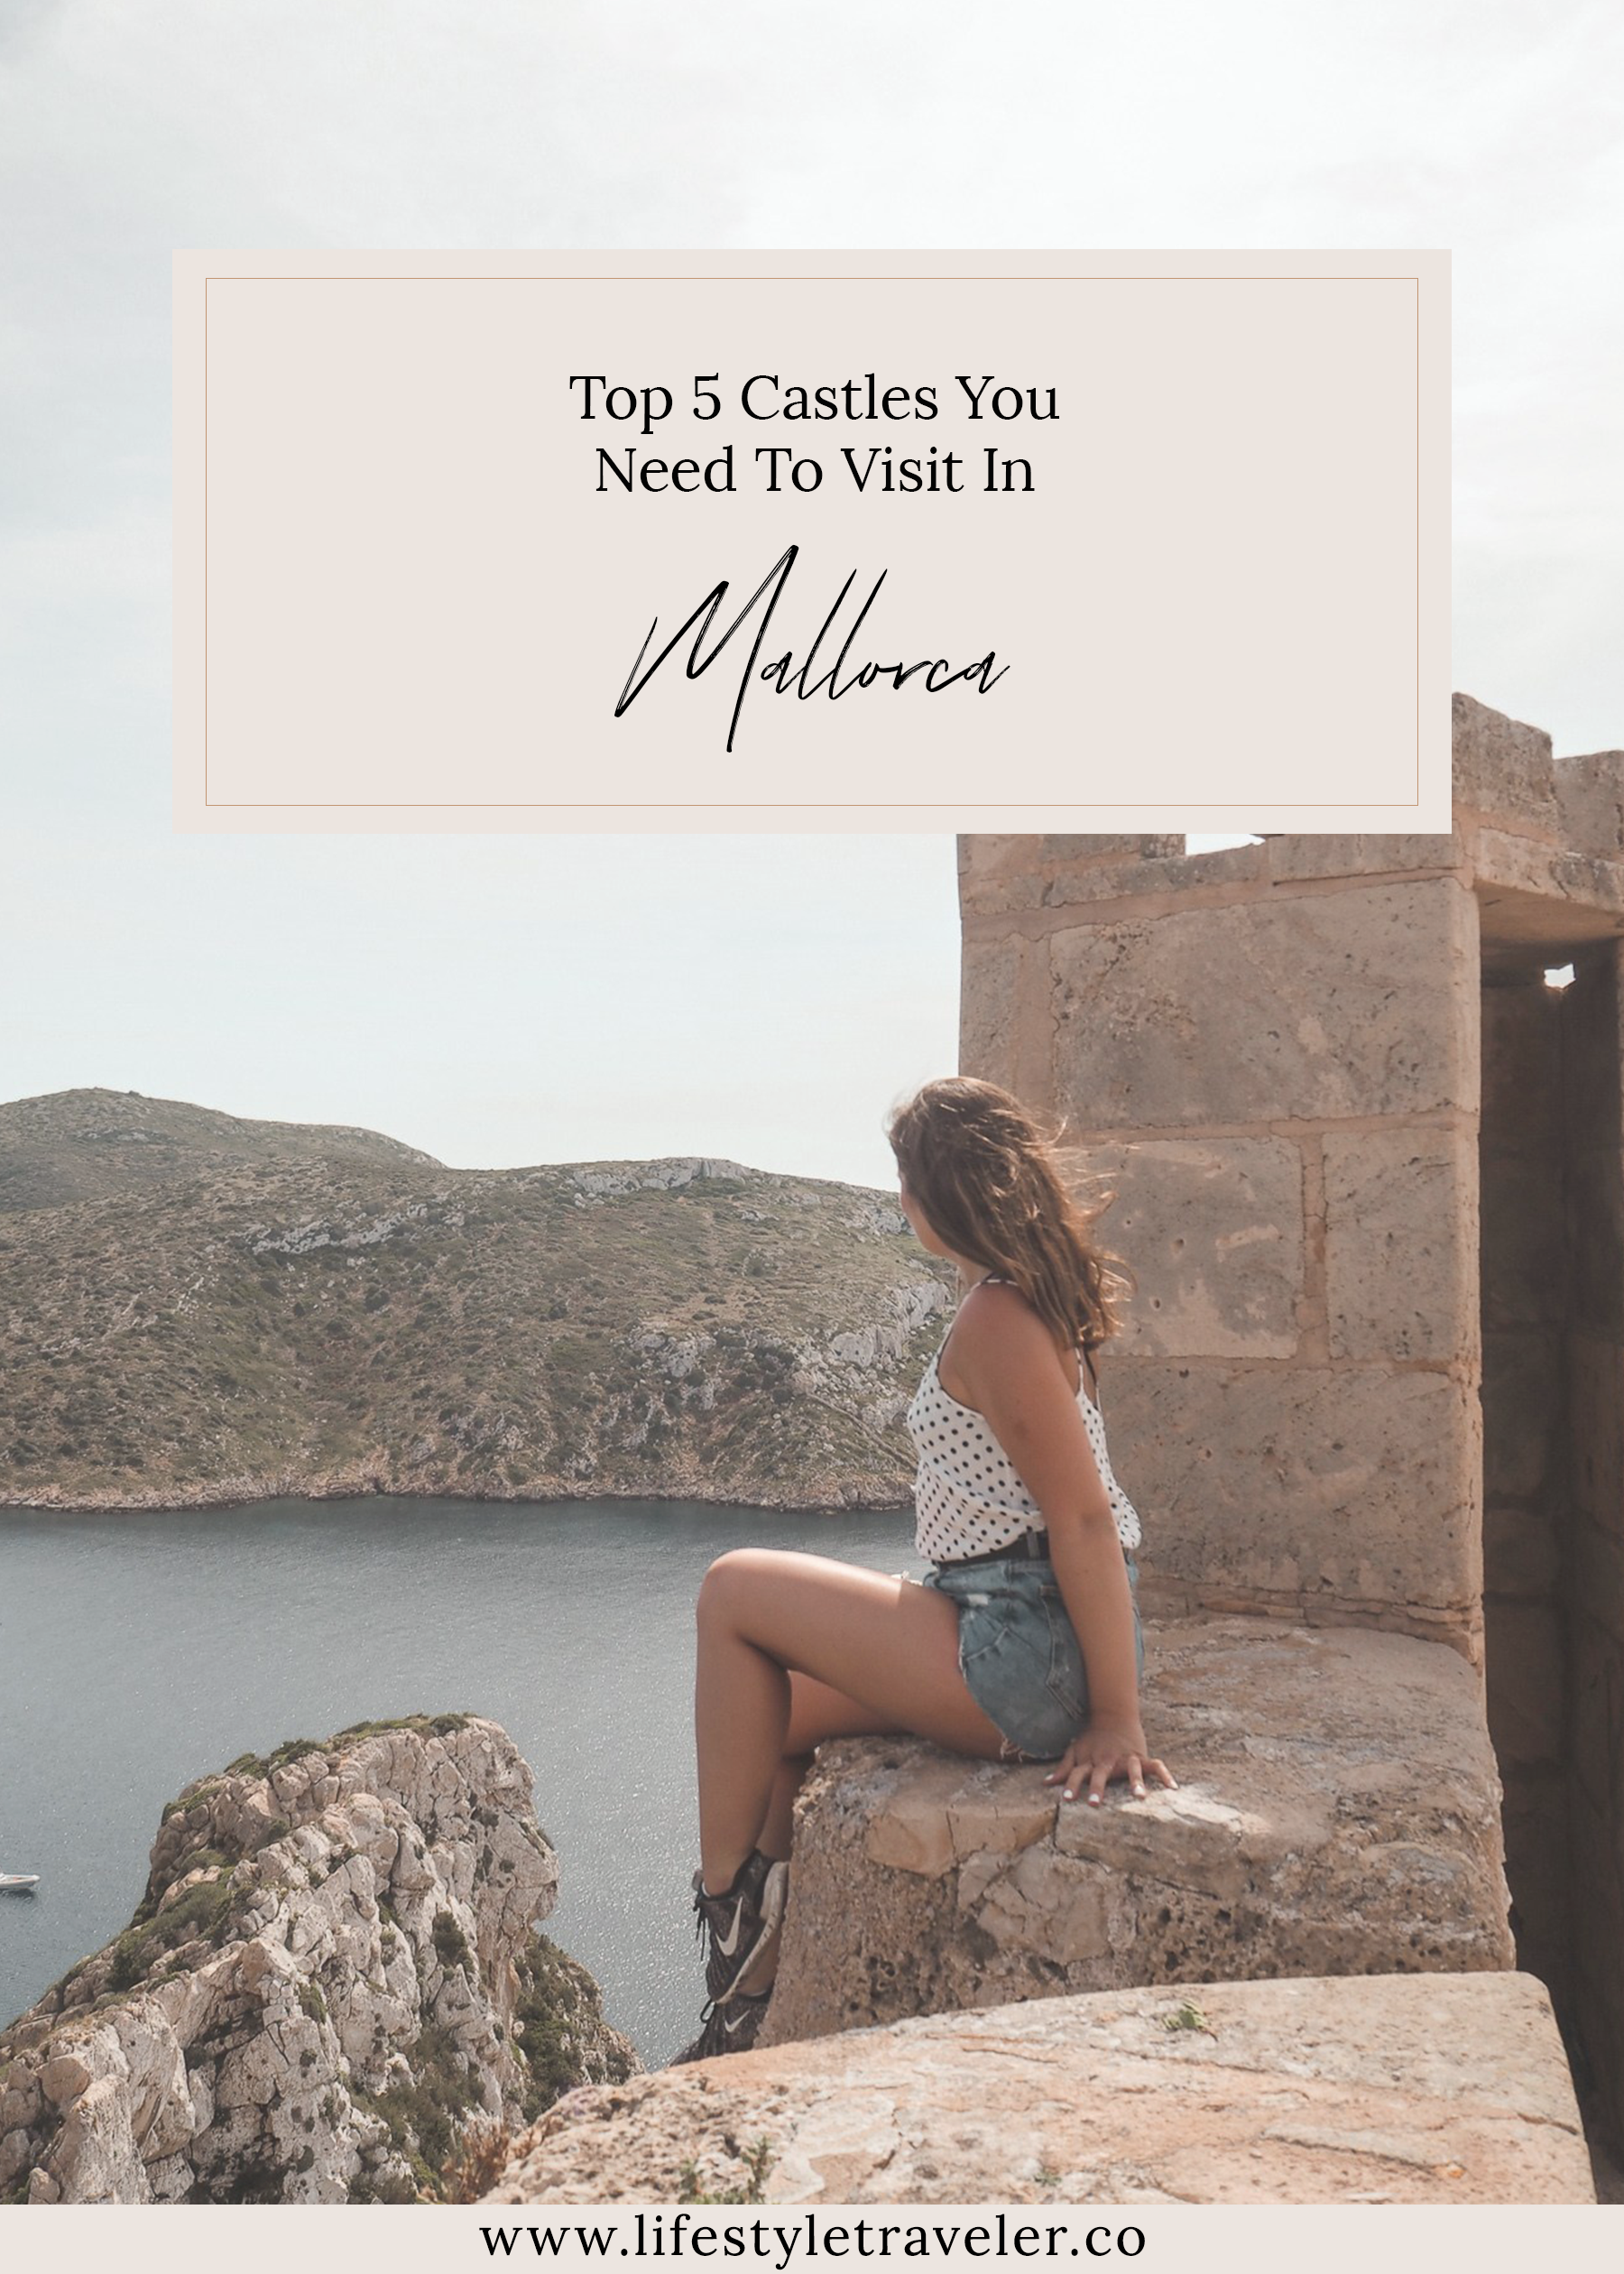 Top 5 Castles In Mallorca You Need To Visit | lifestyletraveler.co | IG: @lifestyletraveler.co